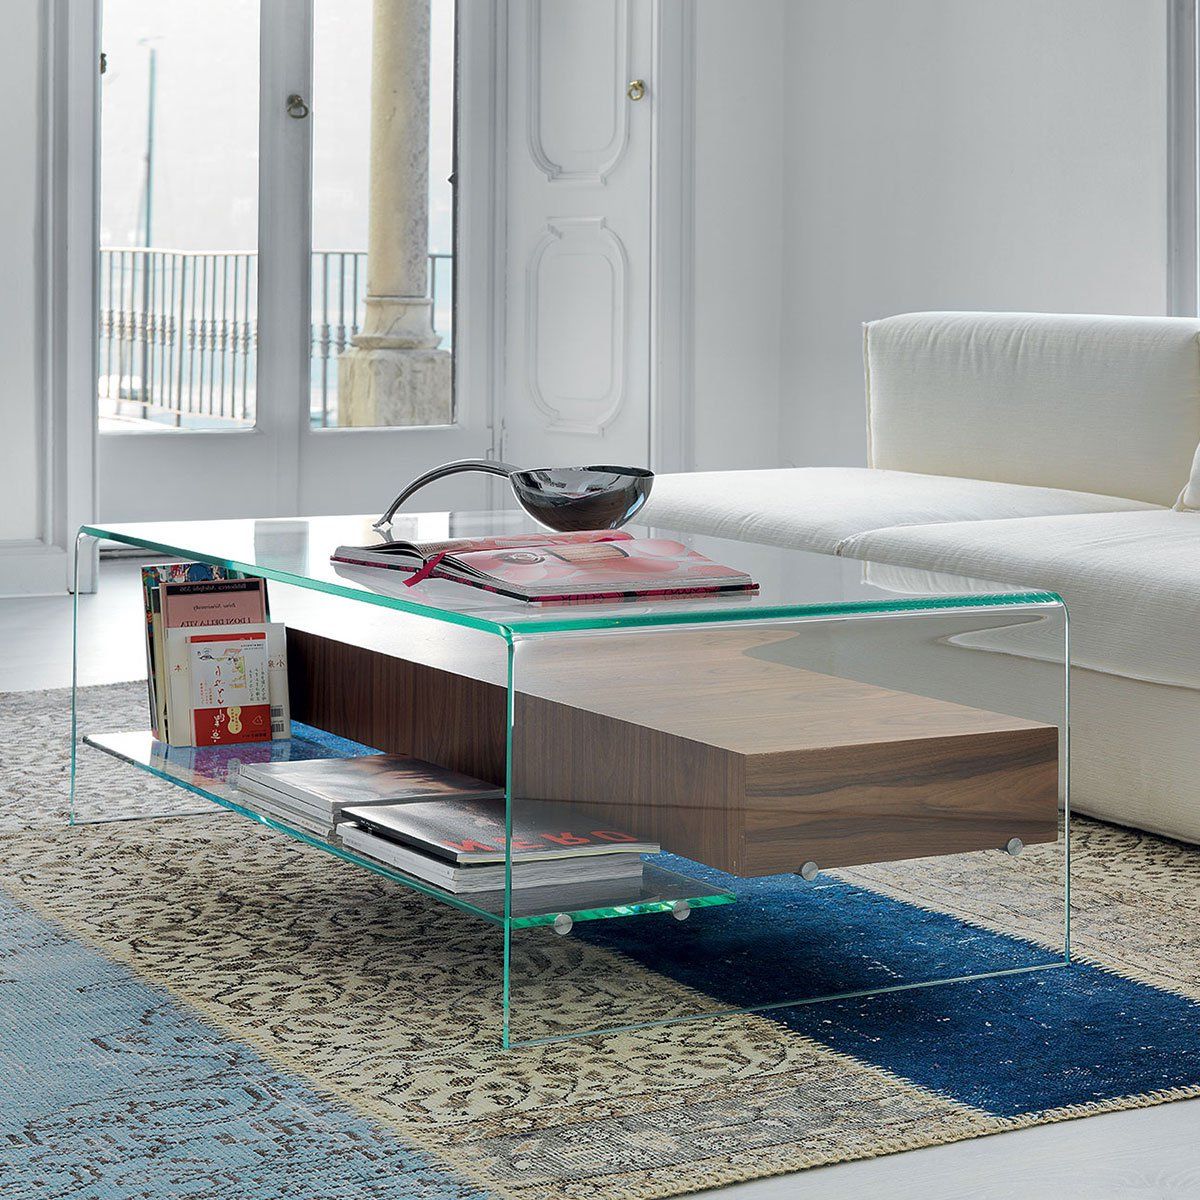 Bridge Glass Coffee Table With Shelf And Drawer – Klarity – Glass Furniture Pertaining To Well Known Glass Coffee Tables With Storage Shelf (View 1 of 20)